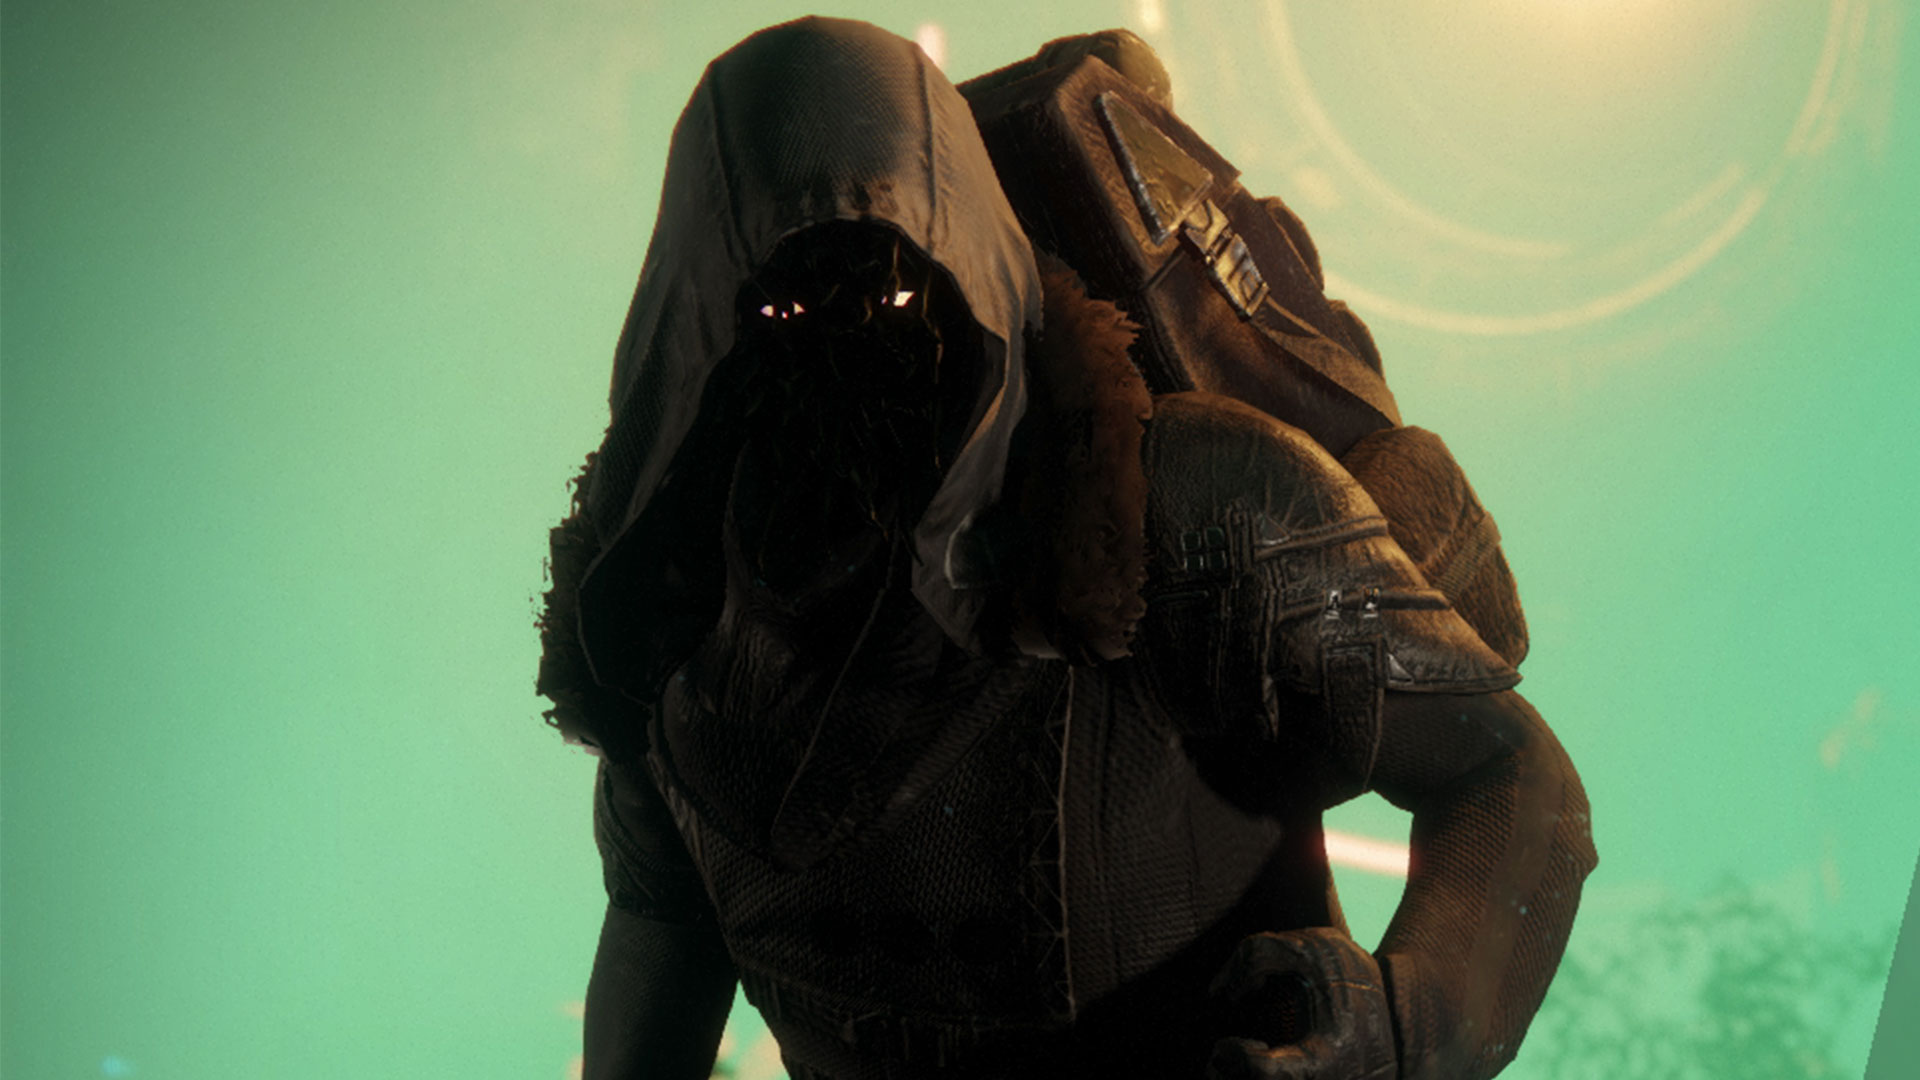 Destiny 2 Xur location and items guide, May 20-24